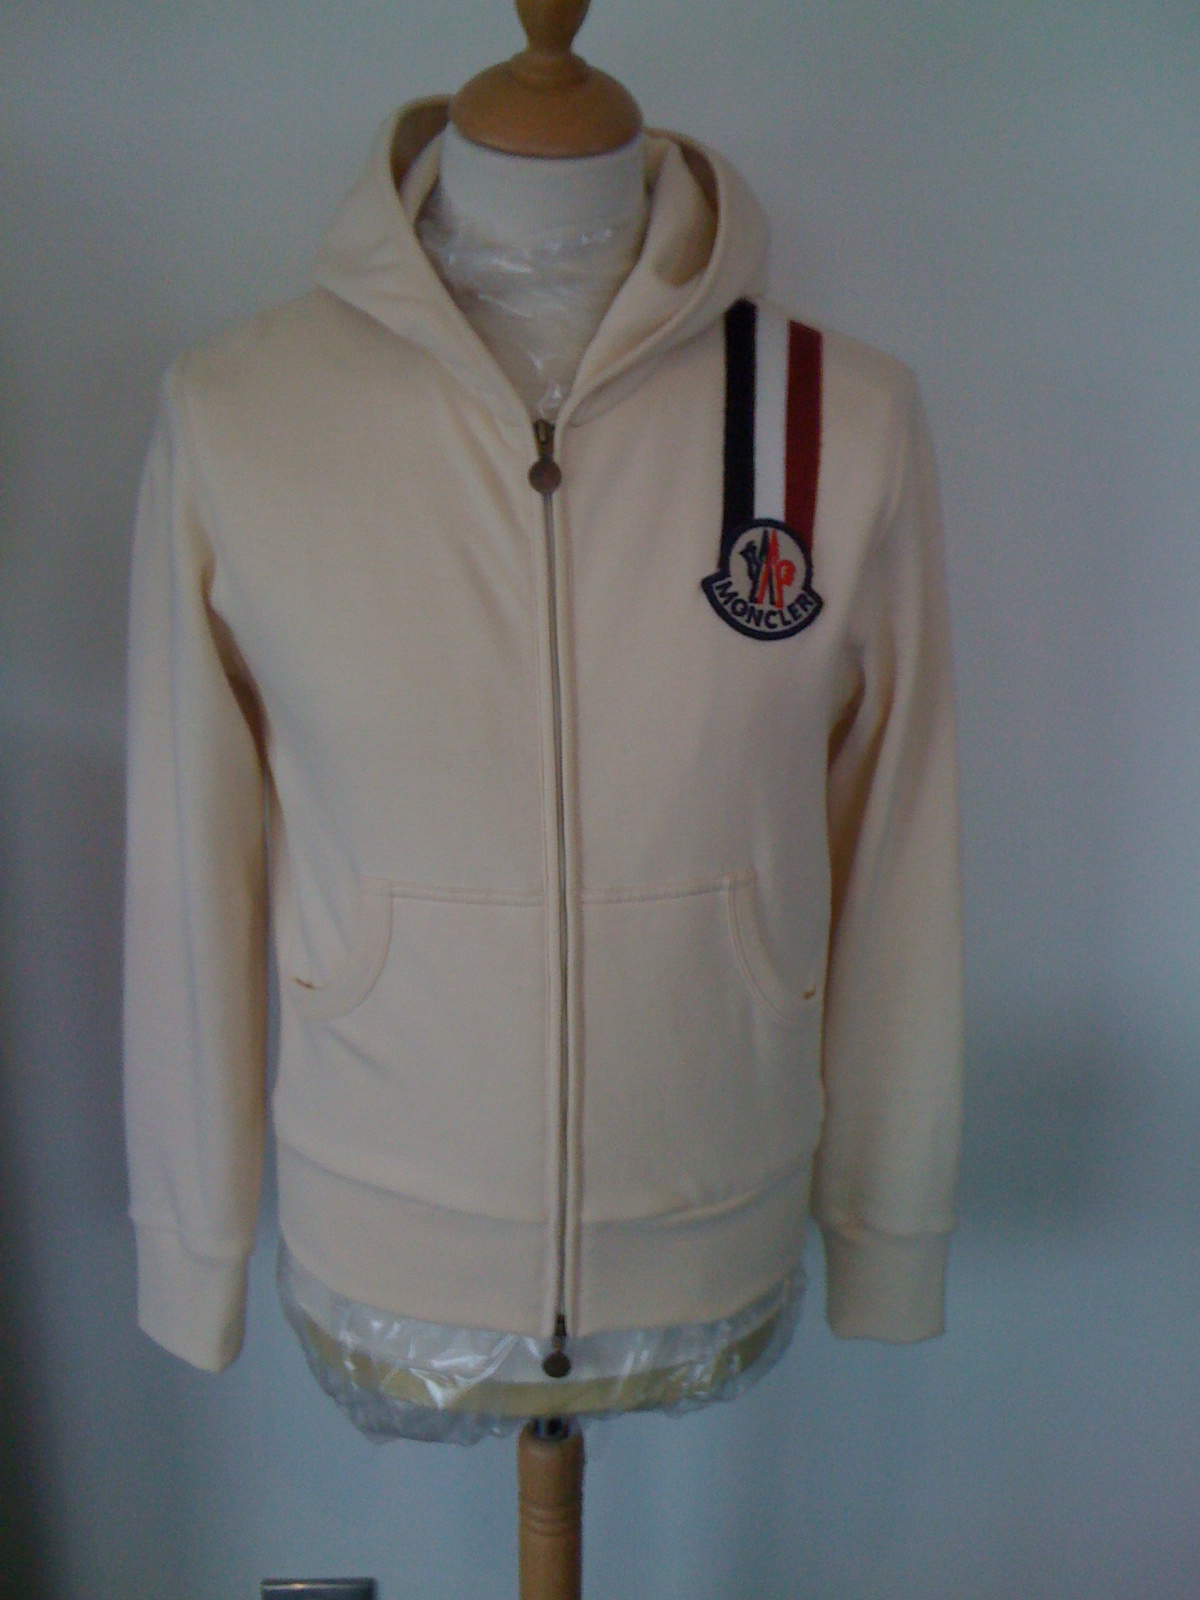 mymanyjeans: Moncler hoodie